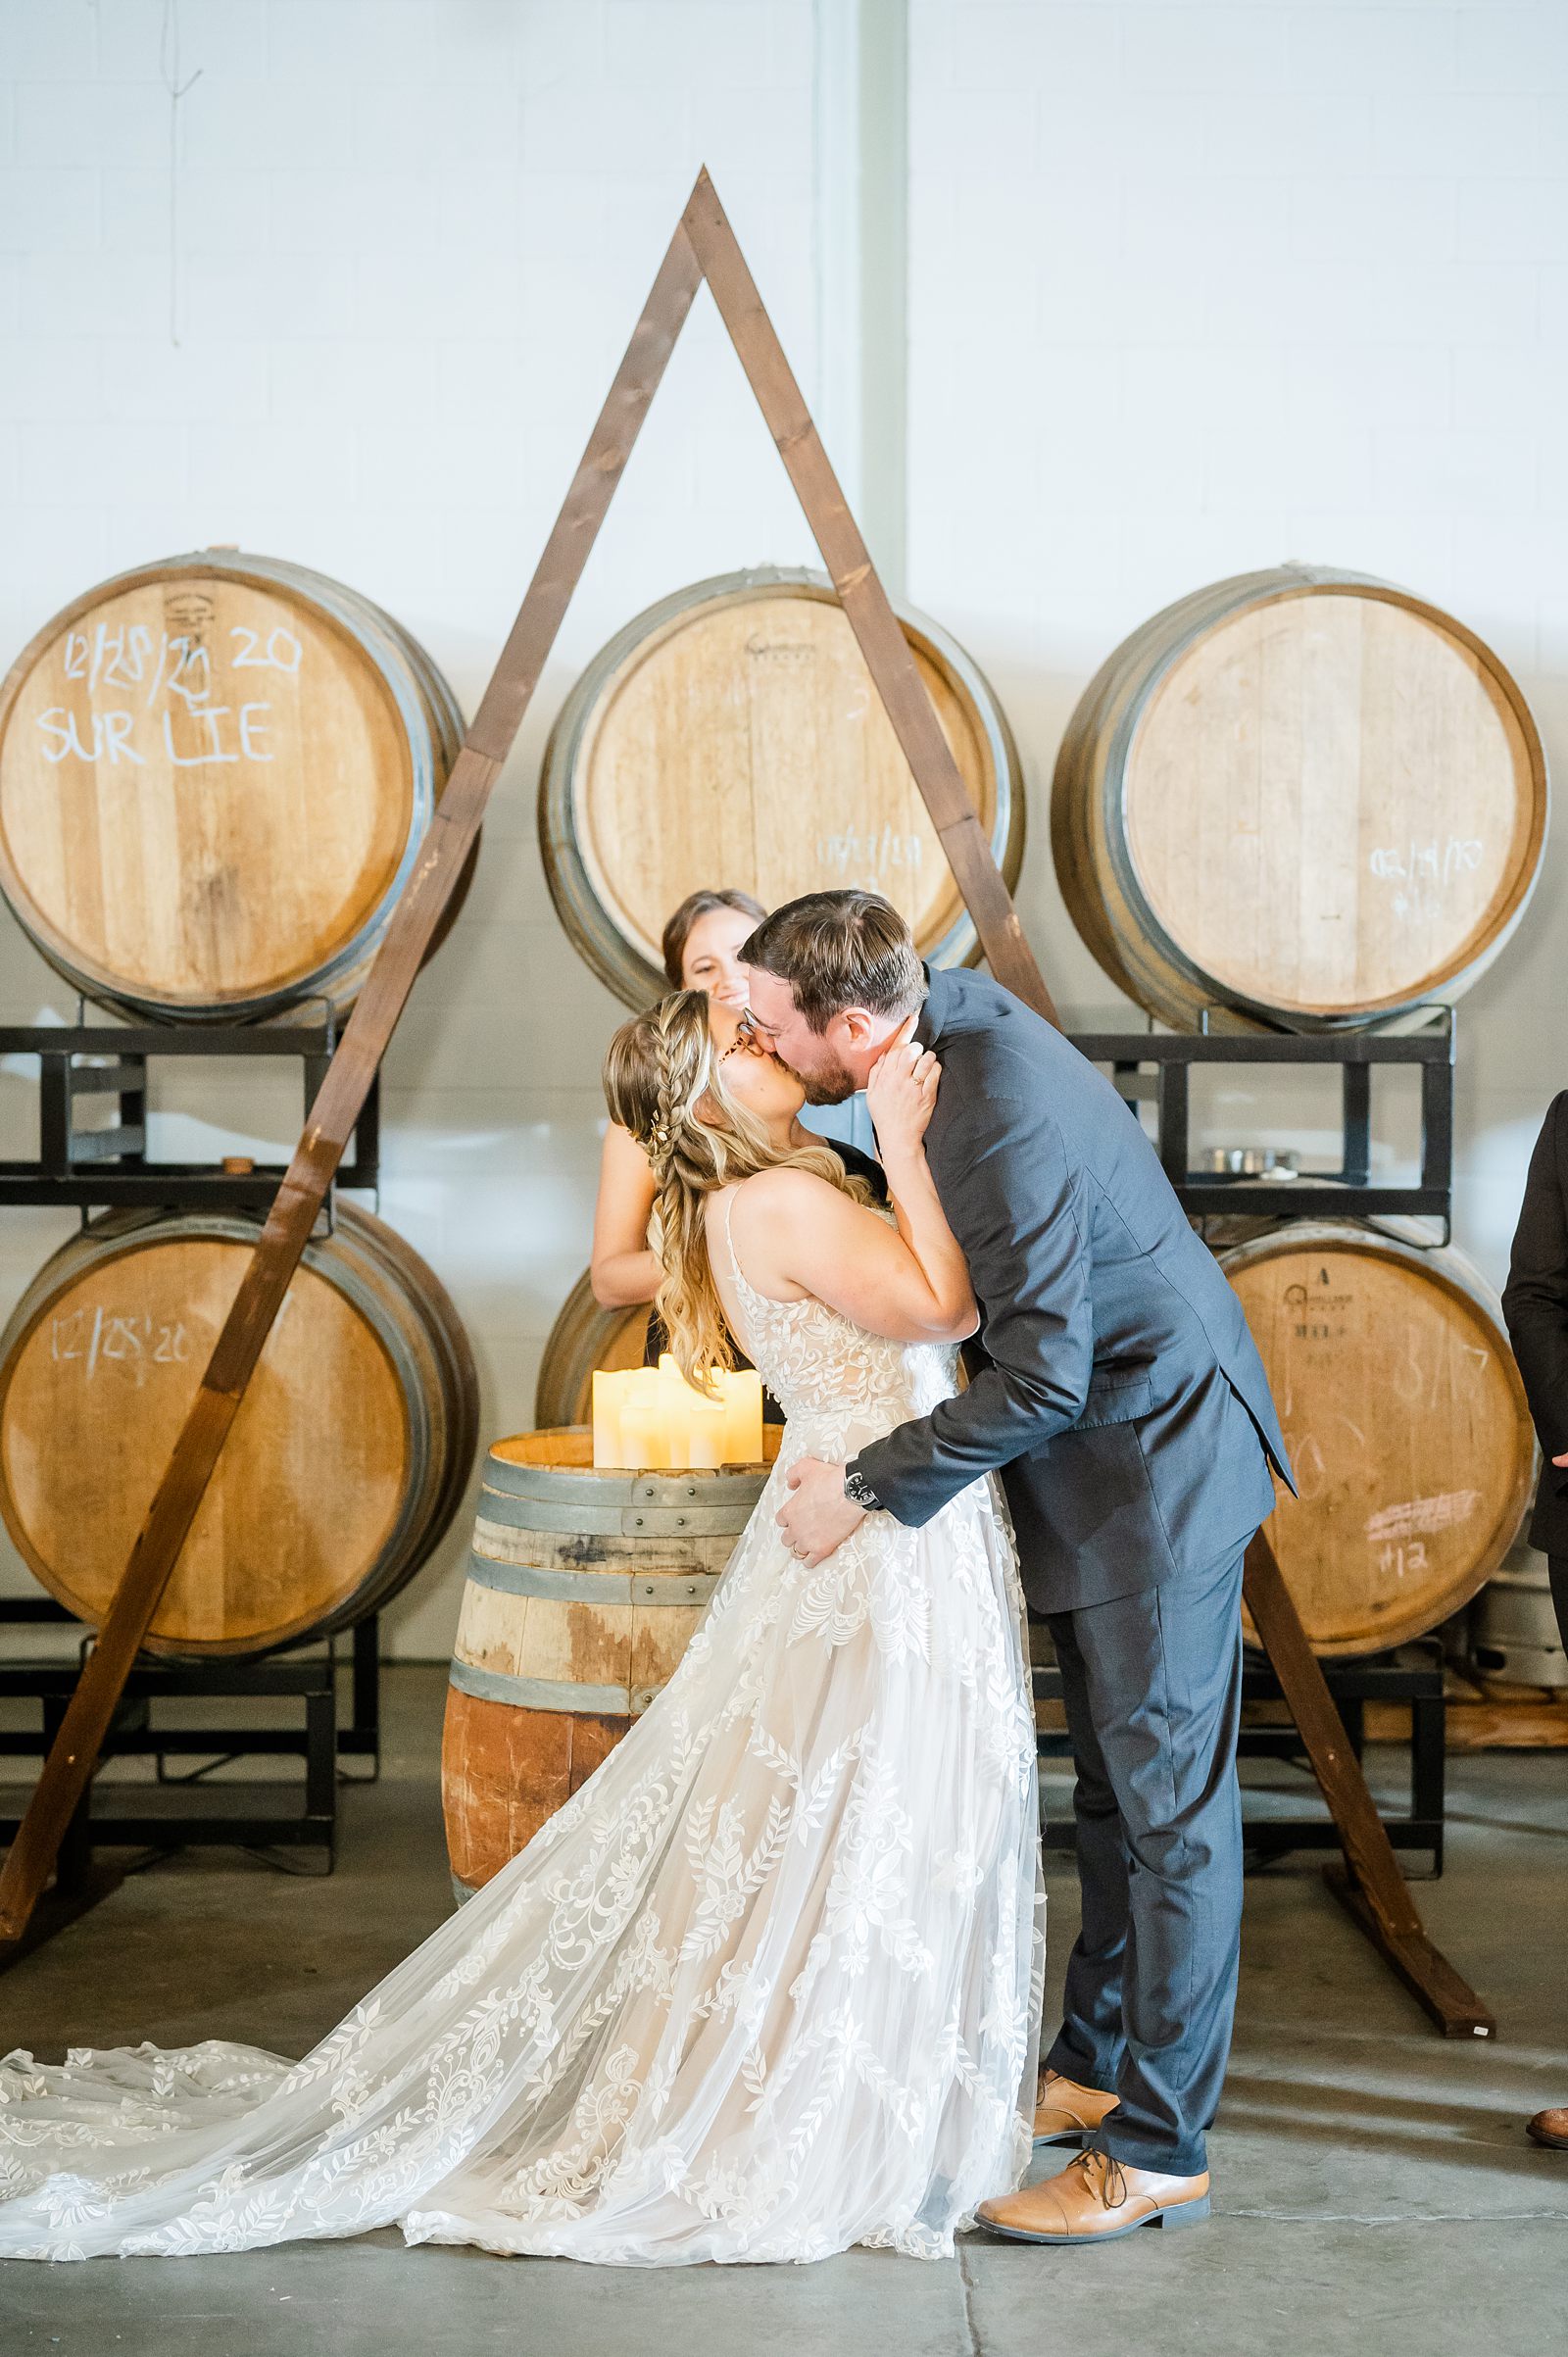 Bride and Groom Kiss During Ceremony at Triple Crossing Beer Wedding